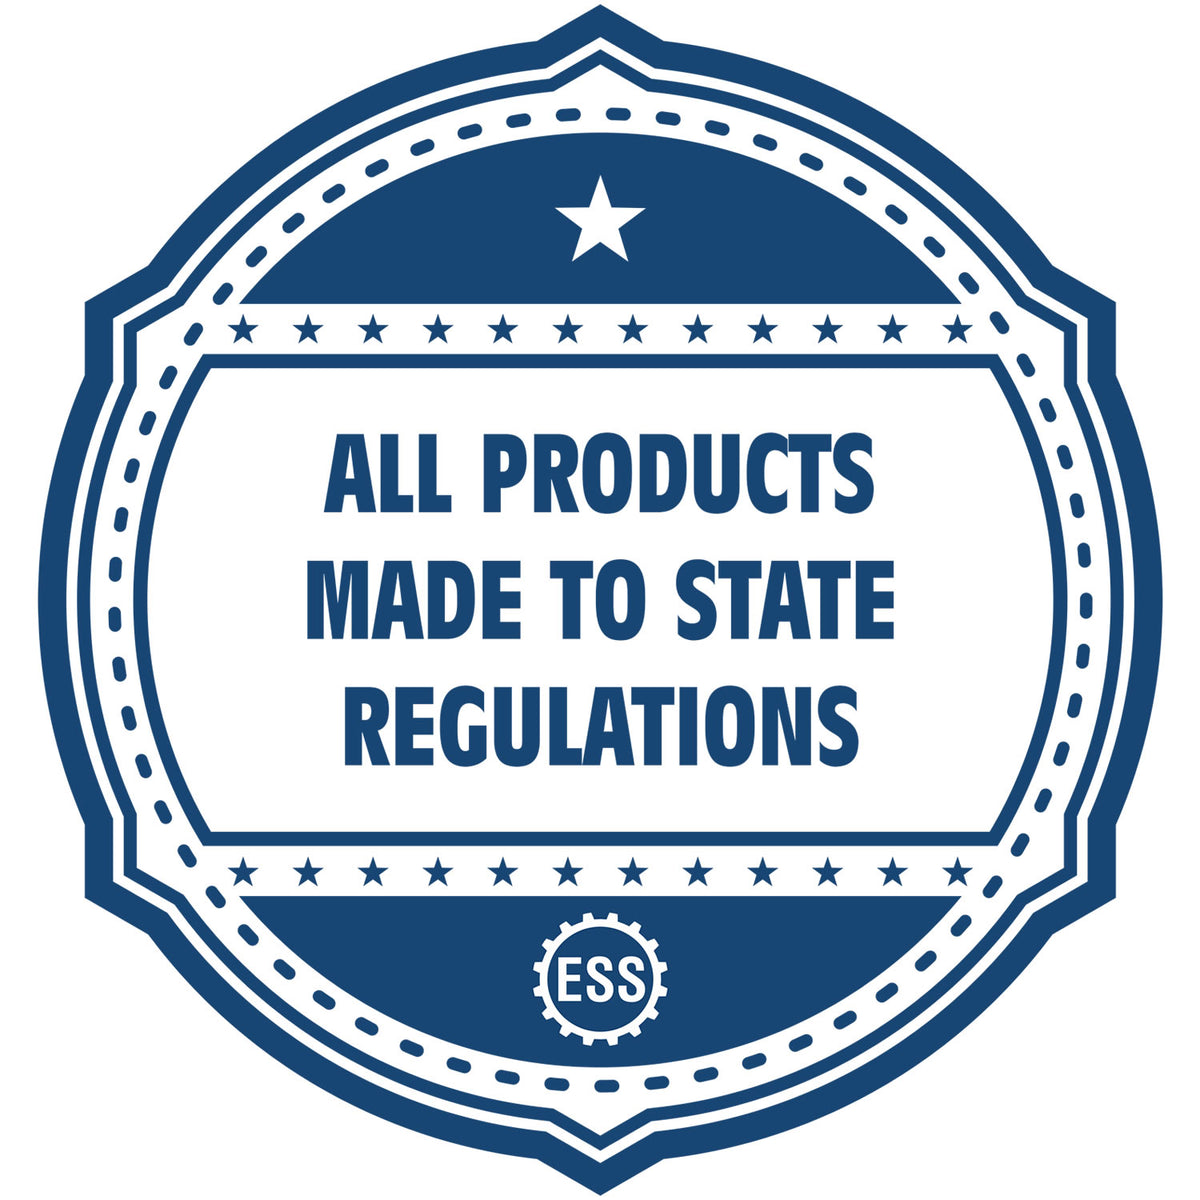 A blue icon or badge for the Georgia Professional Geologist Seal Stamp showing that this product is made in compliance with state regulations.